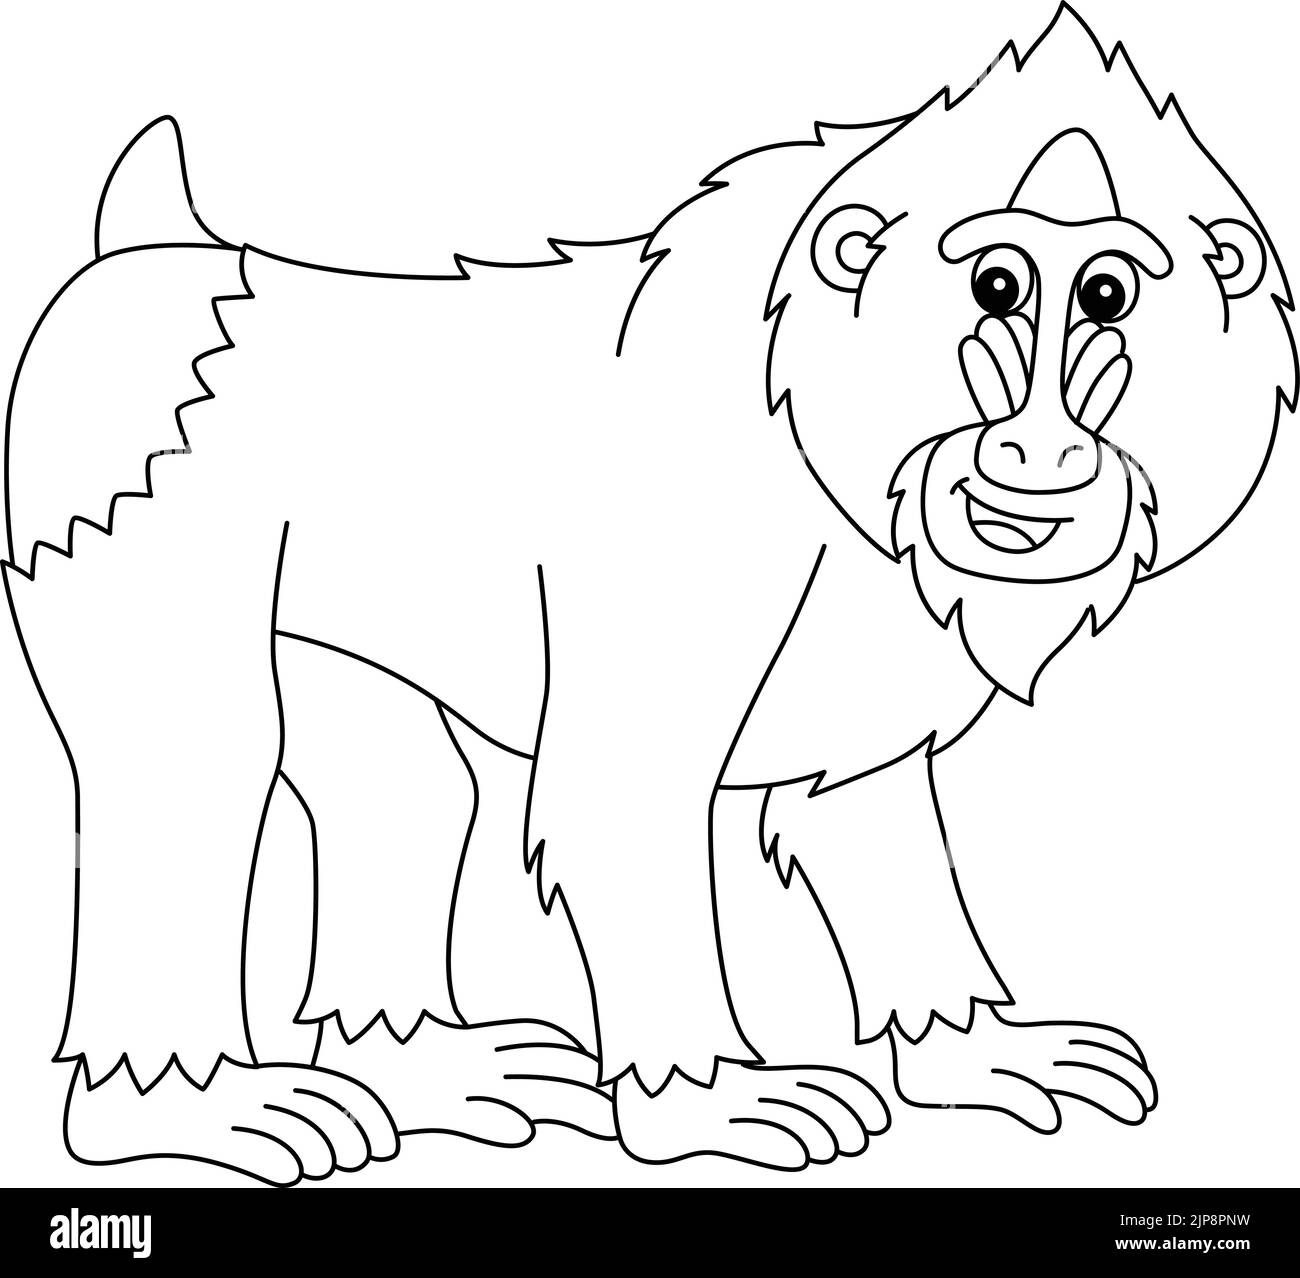 Mandrill Animal Isolated Coloring Page for Kids Stock Vector